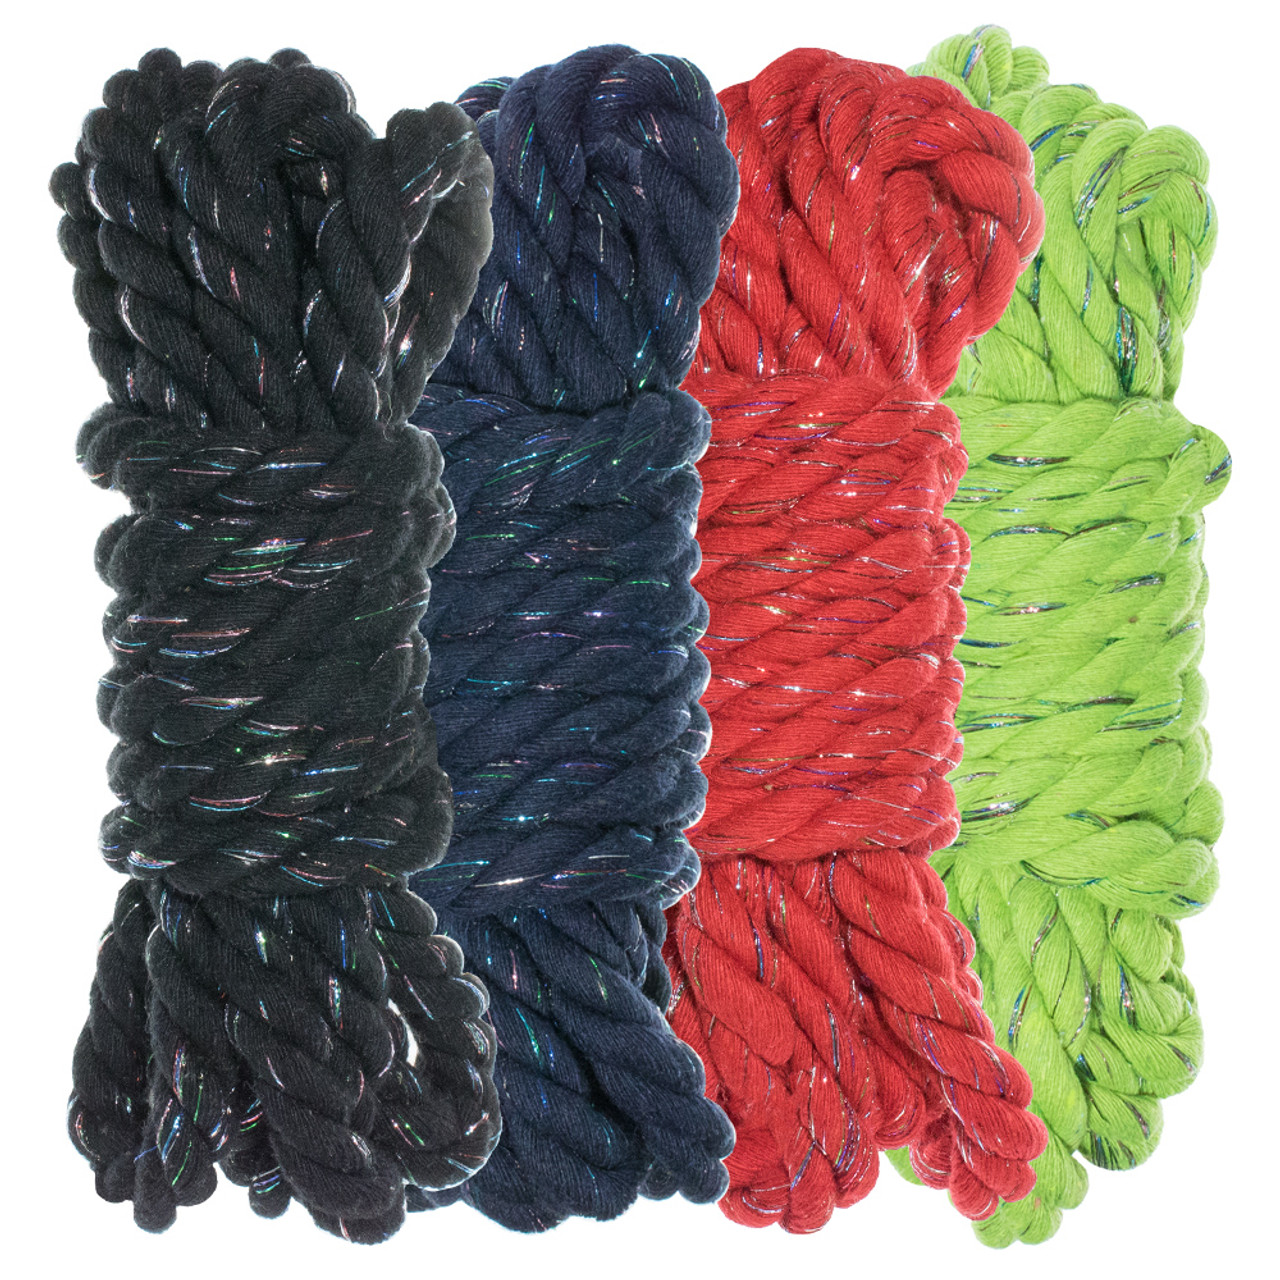 1/4 Twisted Cotton Rope Kit - Dazzle - 40